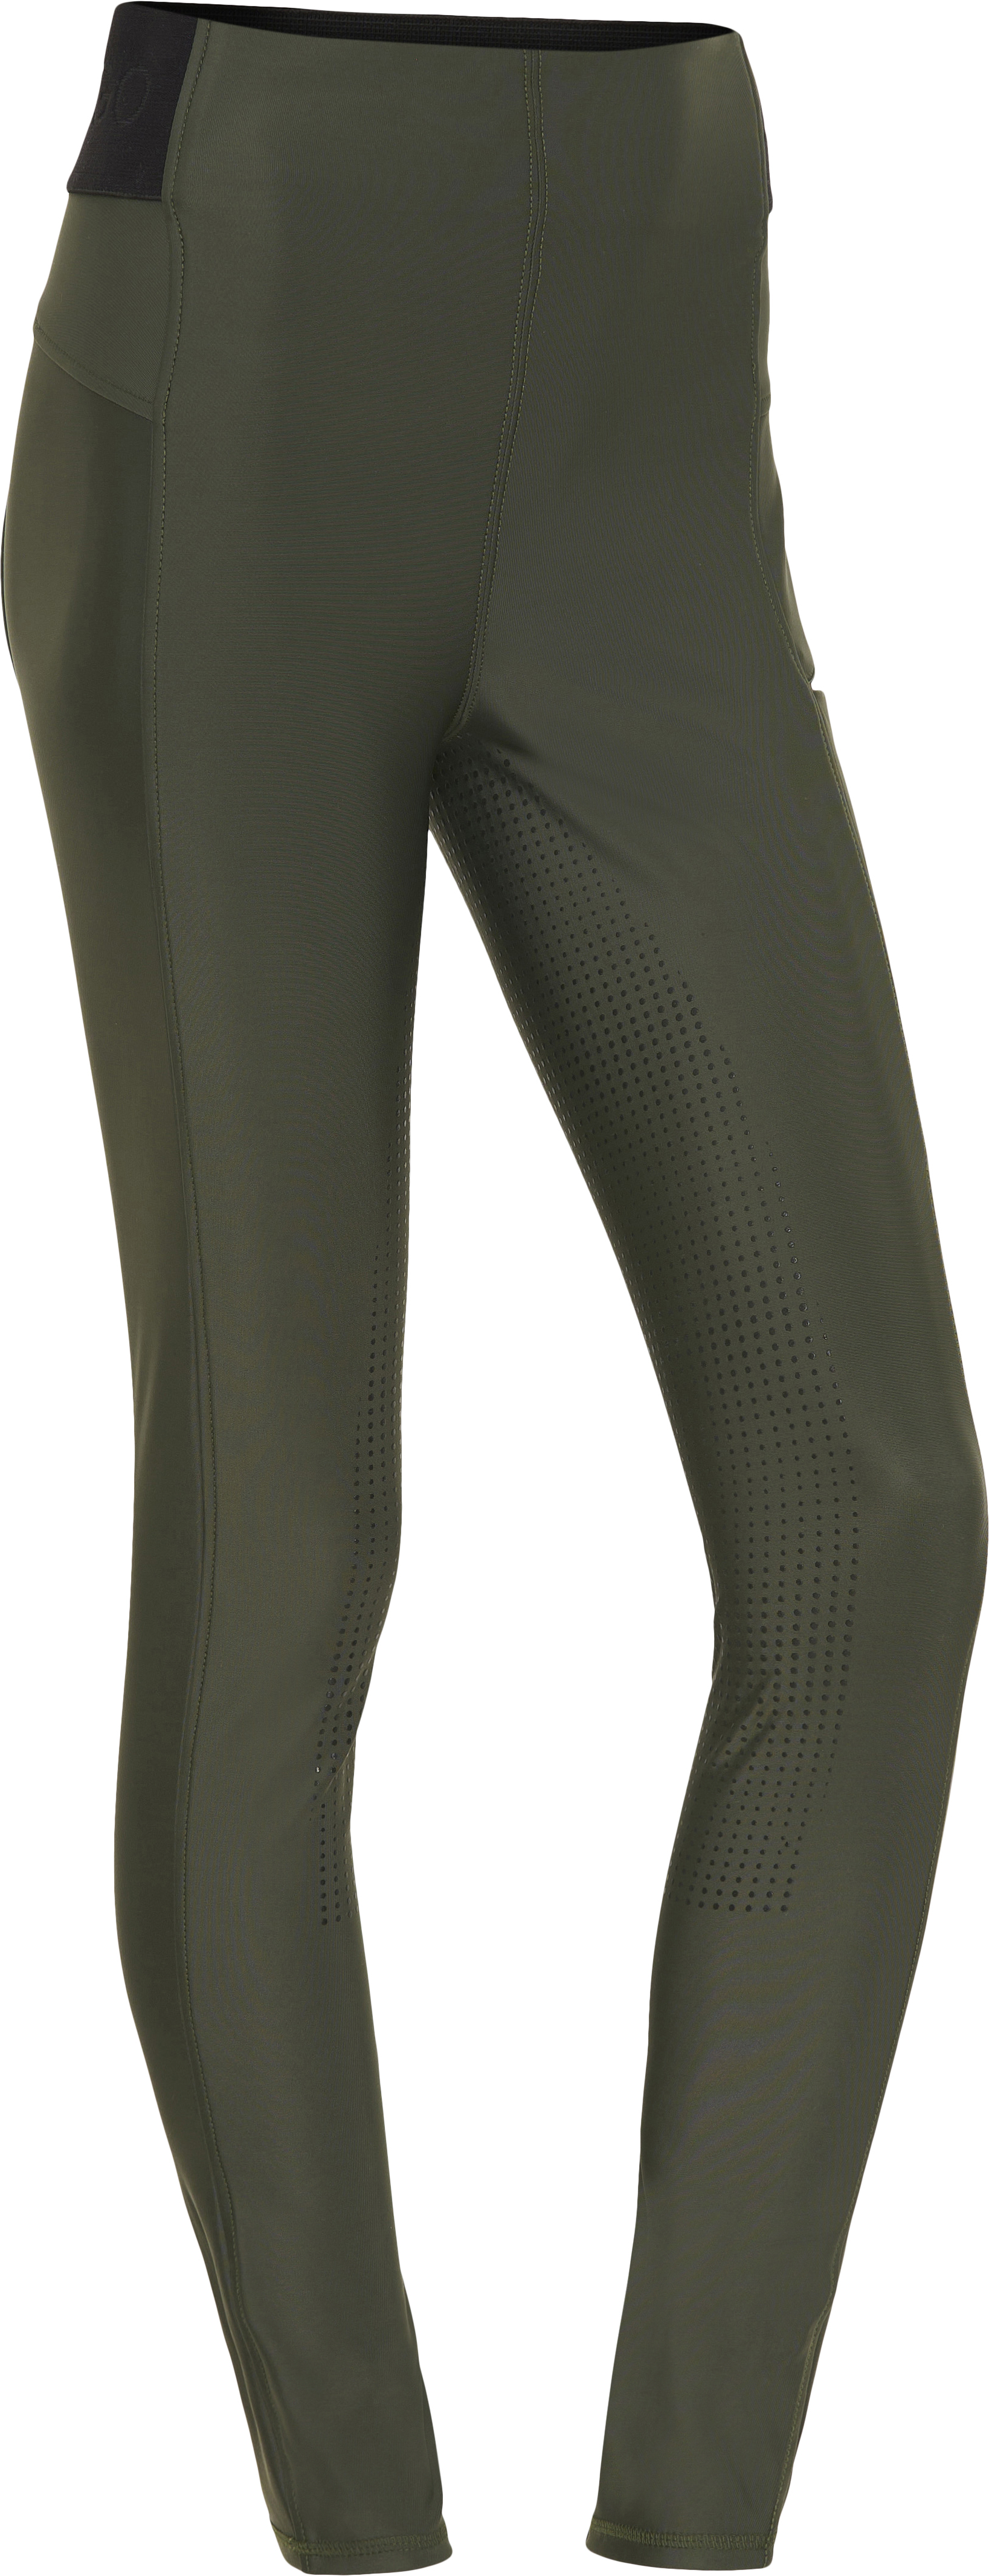 CATAGO Aroy Fullgrip High Waisted Tights Forest (L), Catago